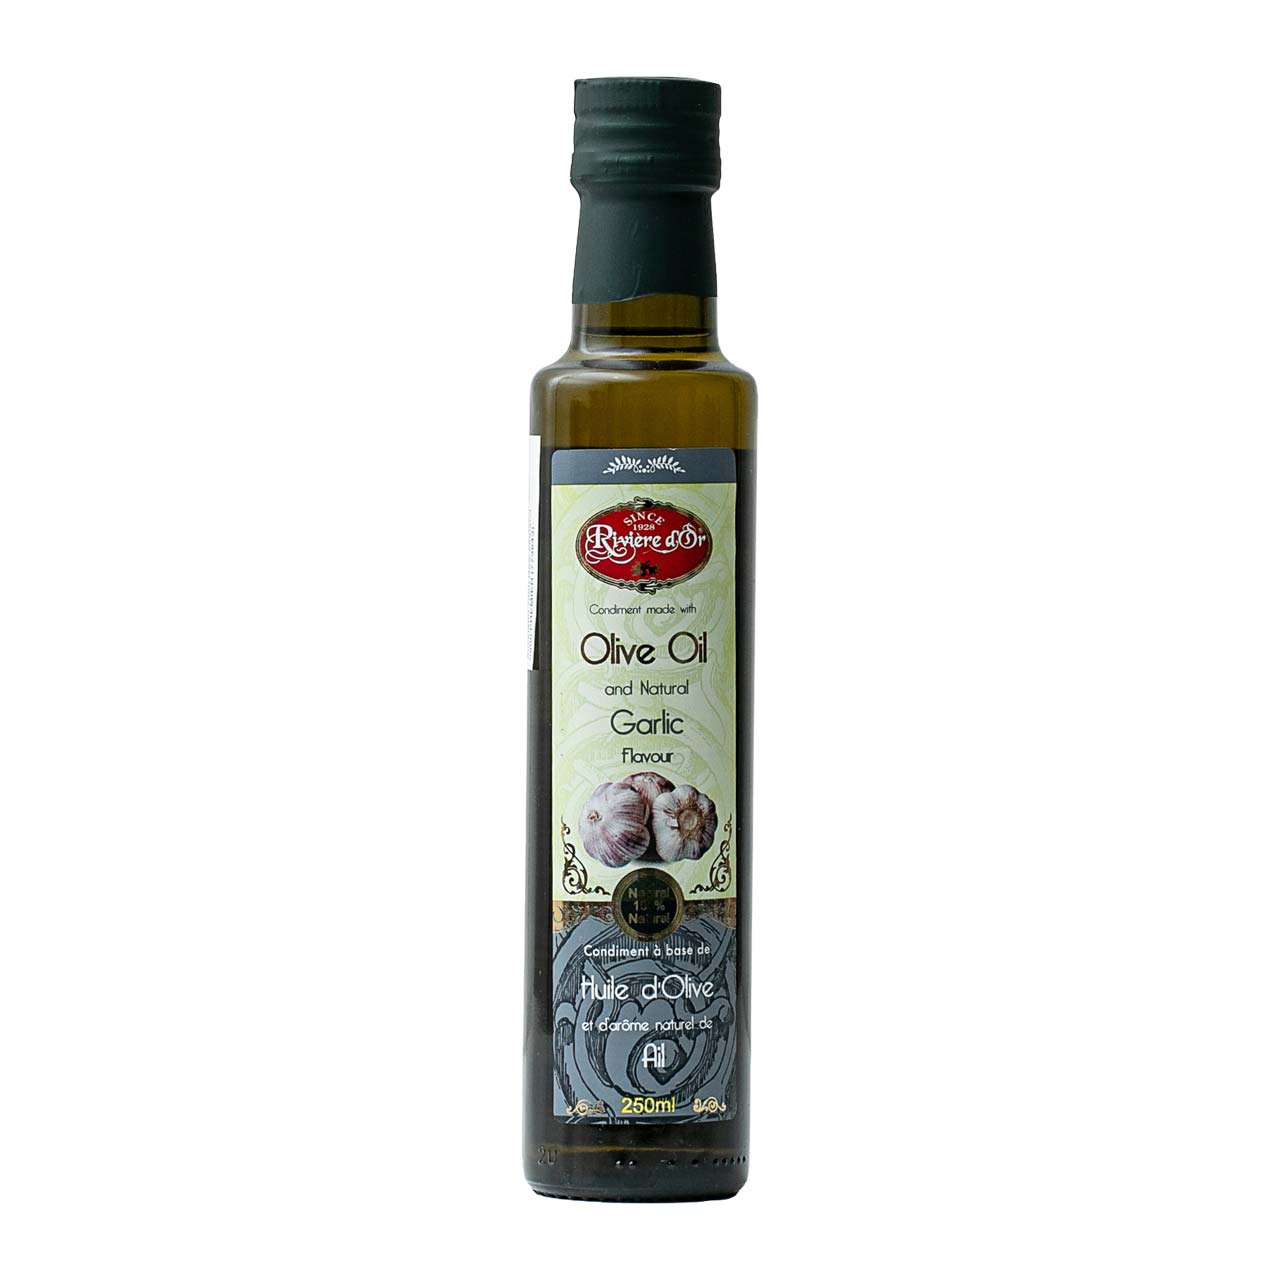 Riviere-d-Or-Olive-Oil-garlic_front